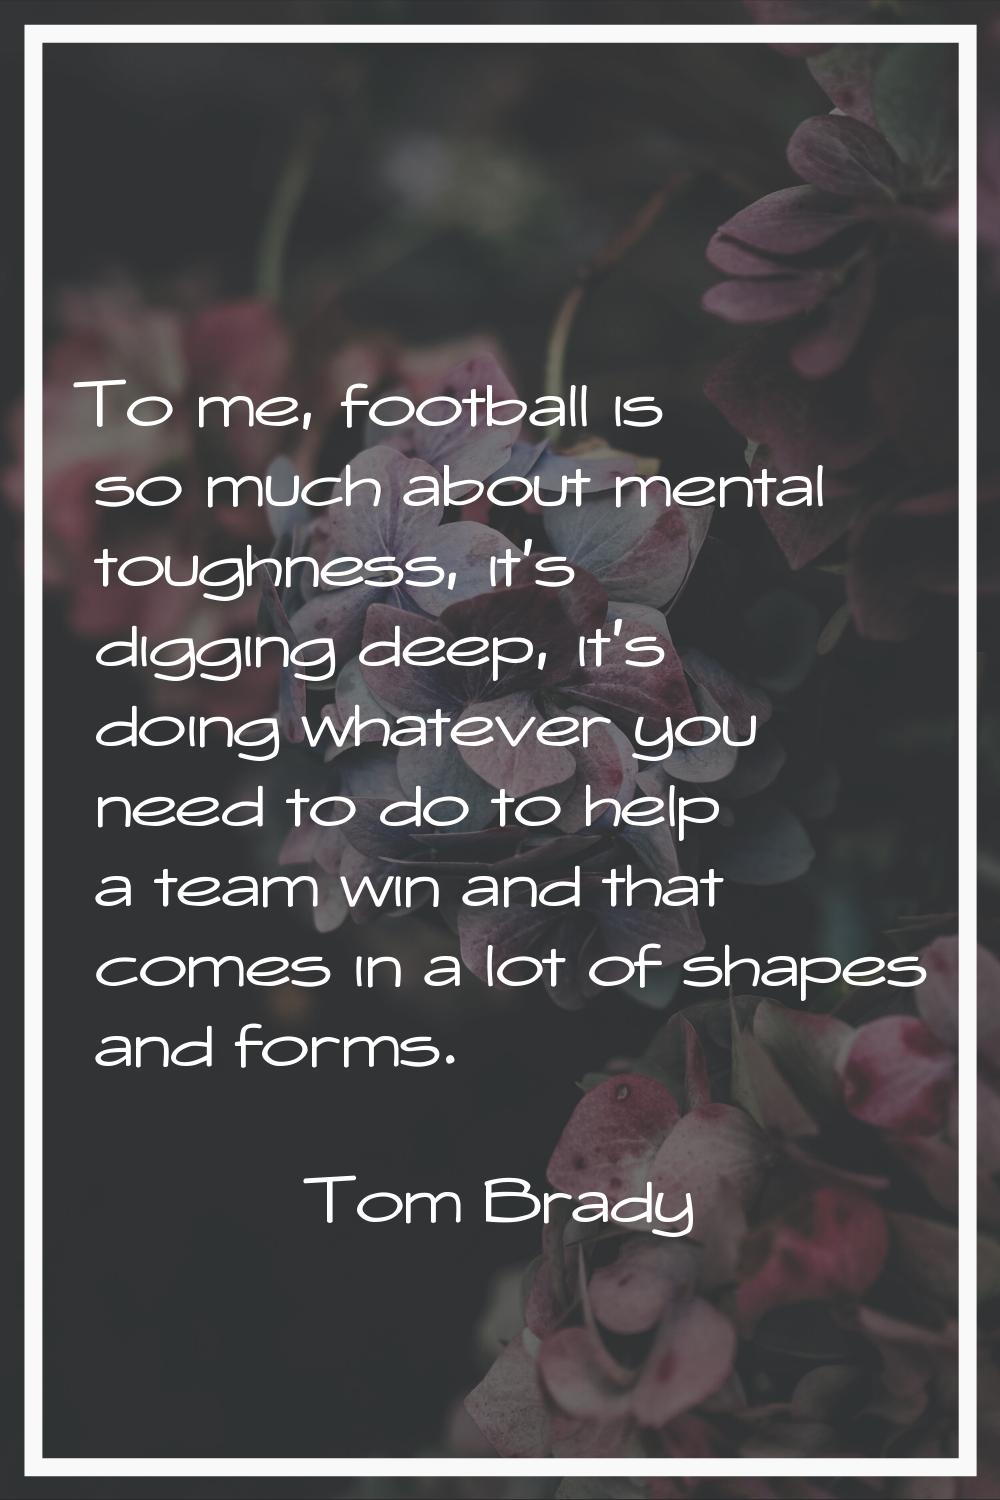 To me, football is so much about mental toughness, it's digging deep, it's doing whatever you need 